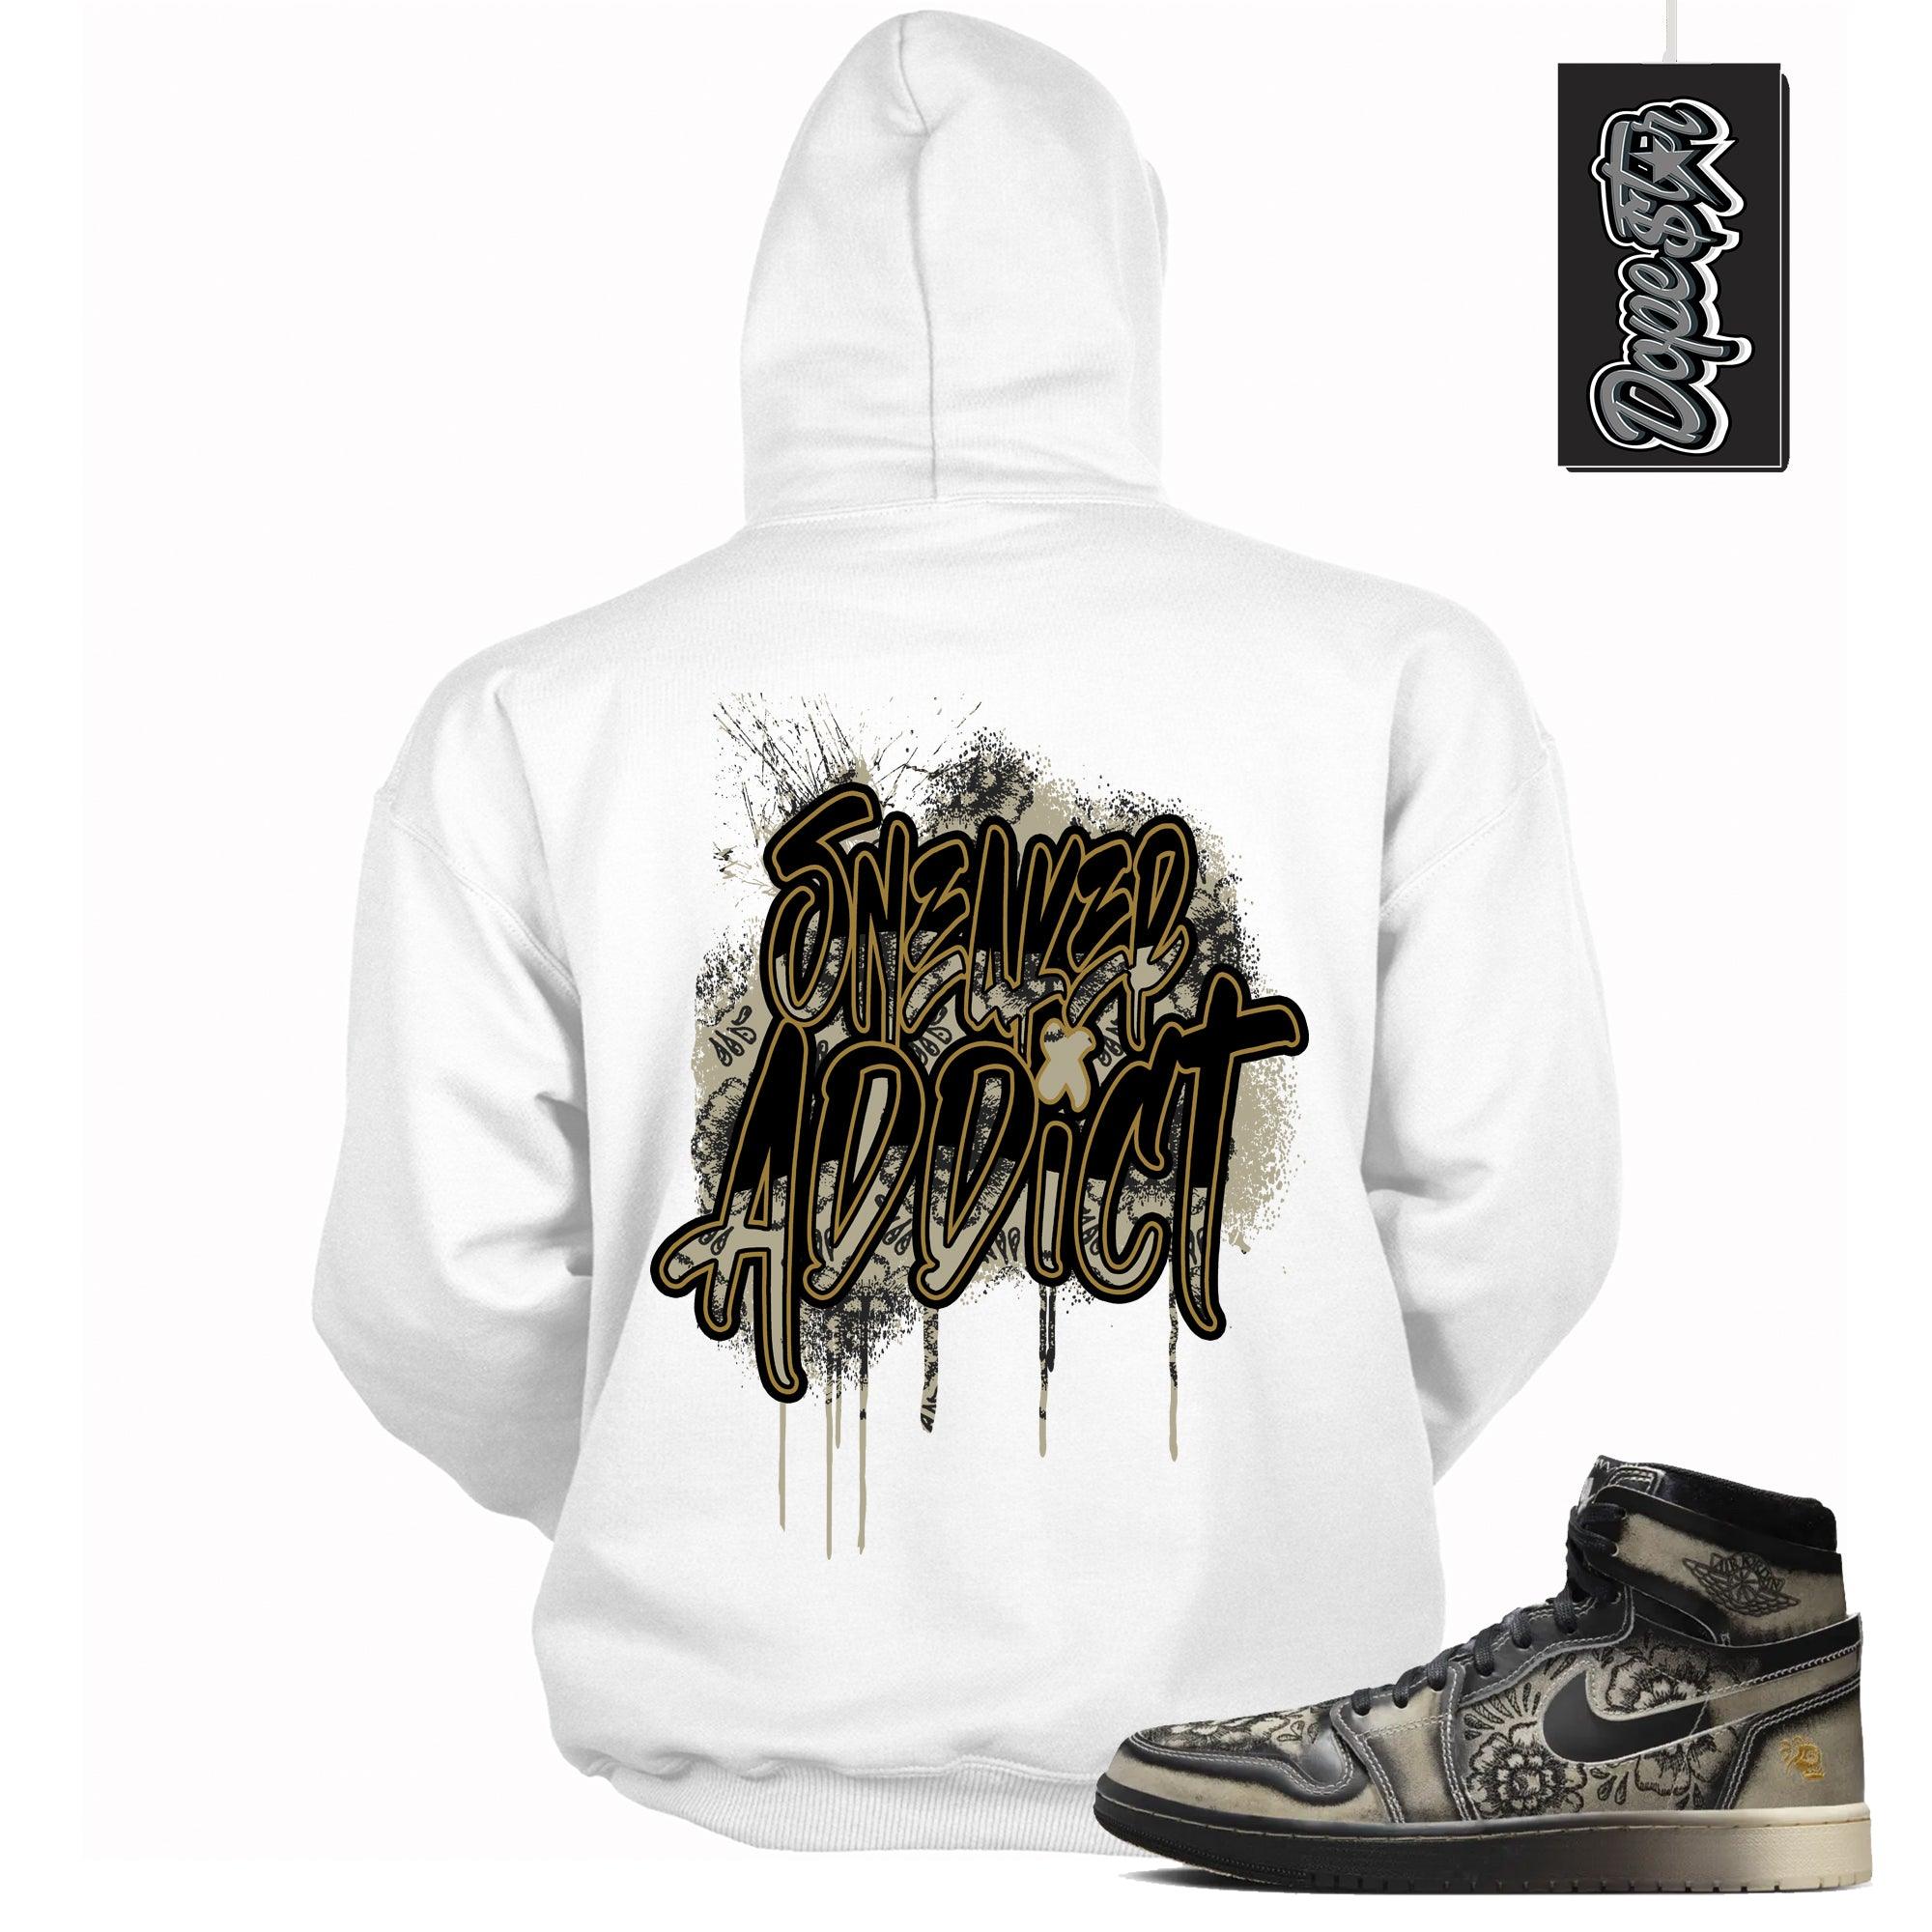 Cool White Graphic Hoodie with “ Sneaker Addict “ print, that perfectly matches Air Jordan 1 High Zoom Comfort 2 Dia de Muertos Black and Pale Ivory sneakers